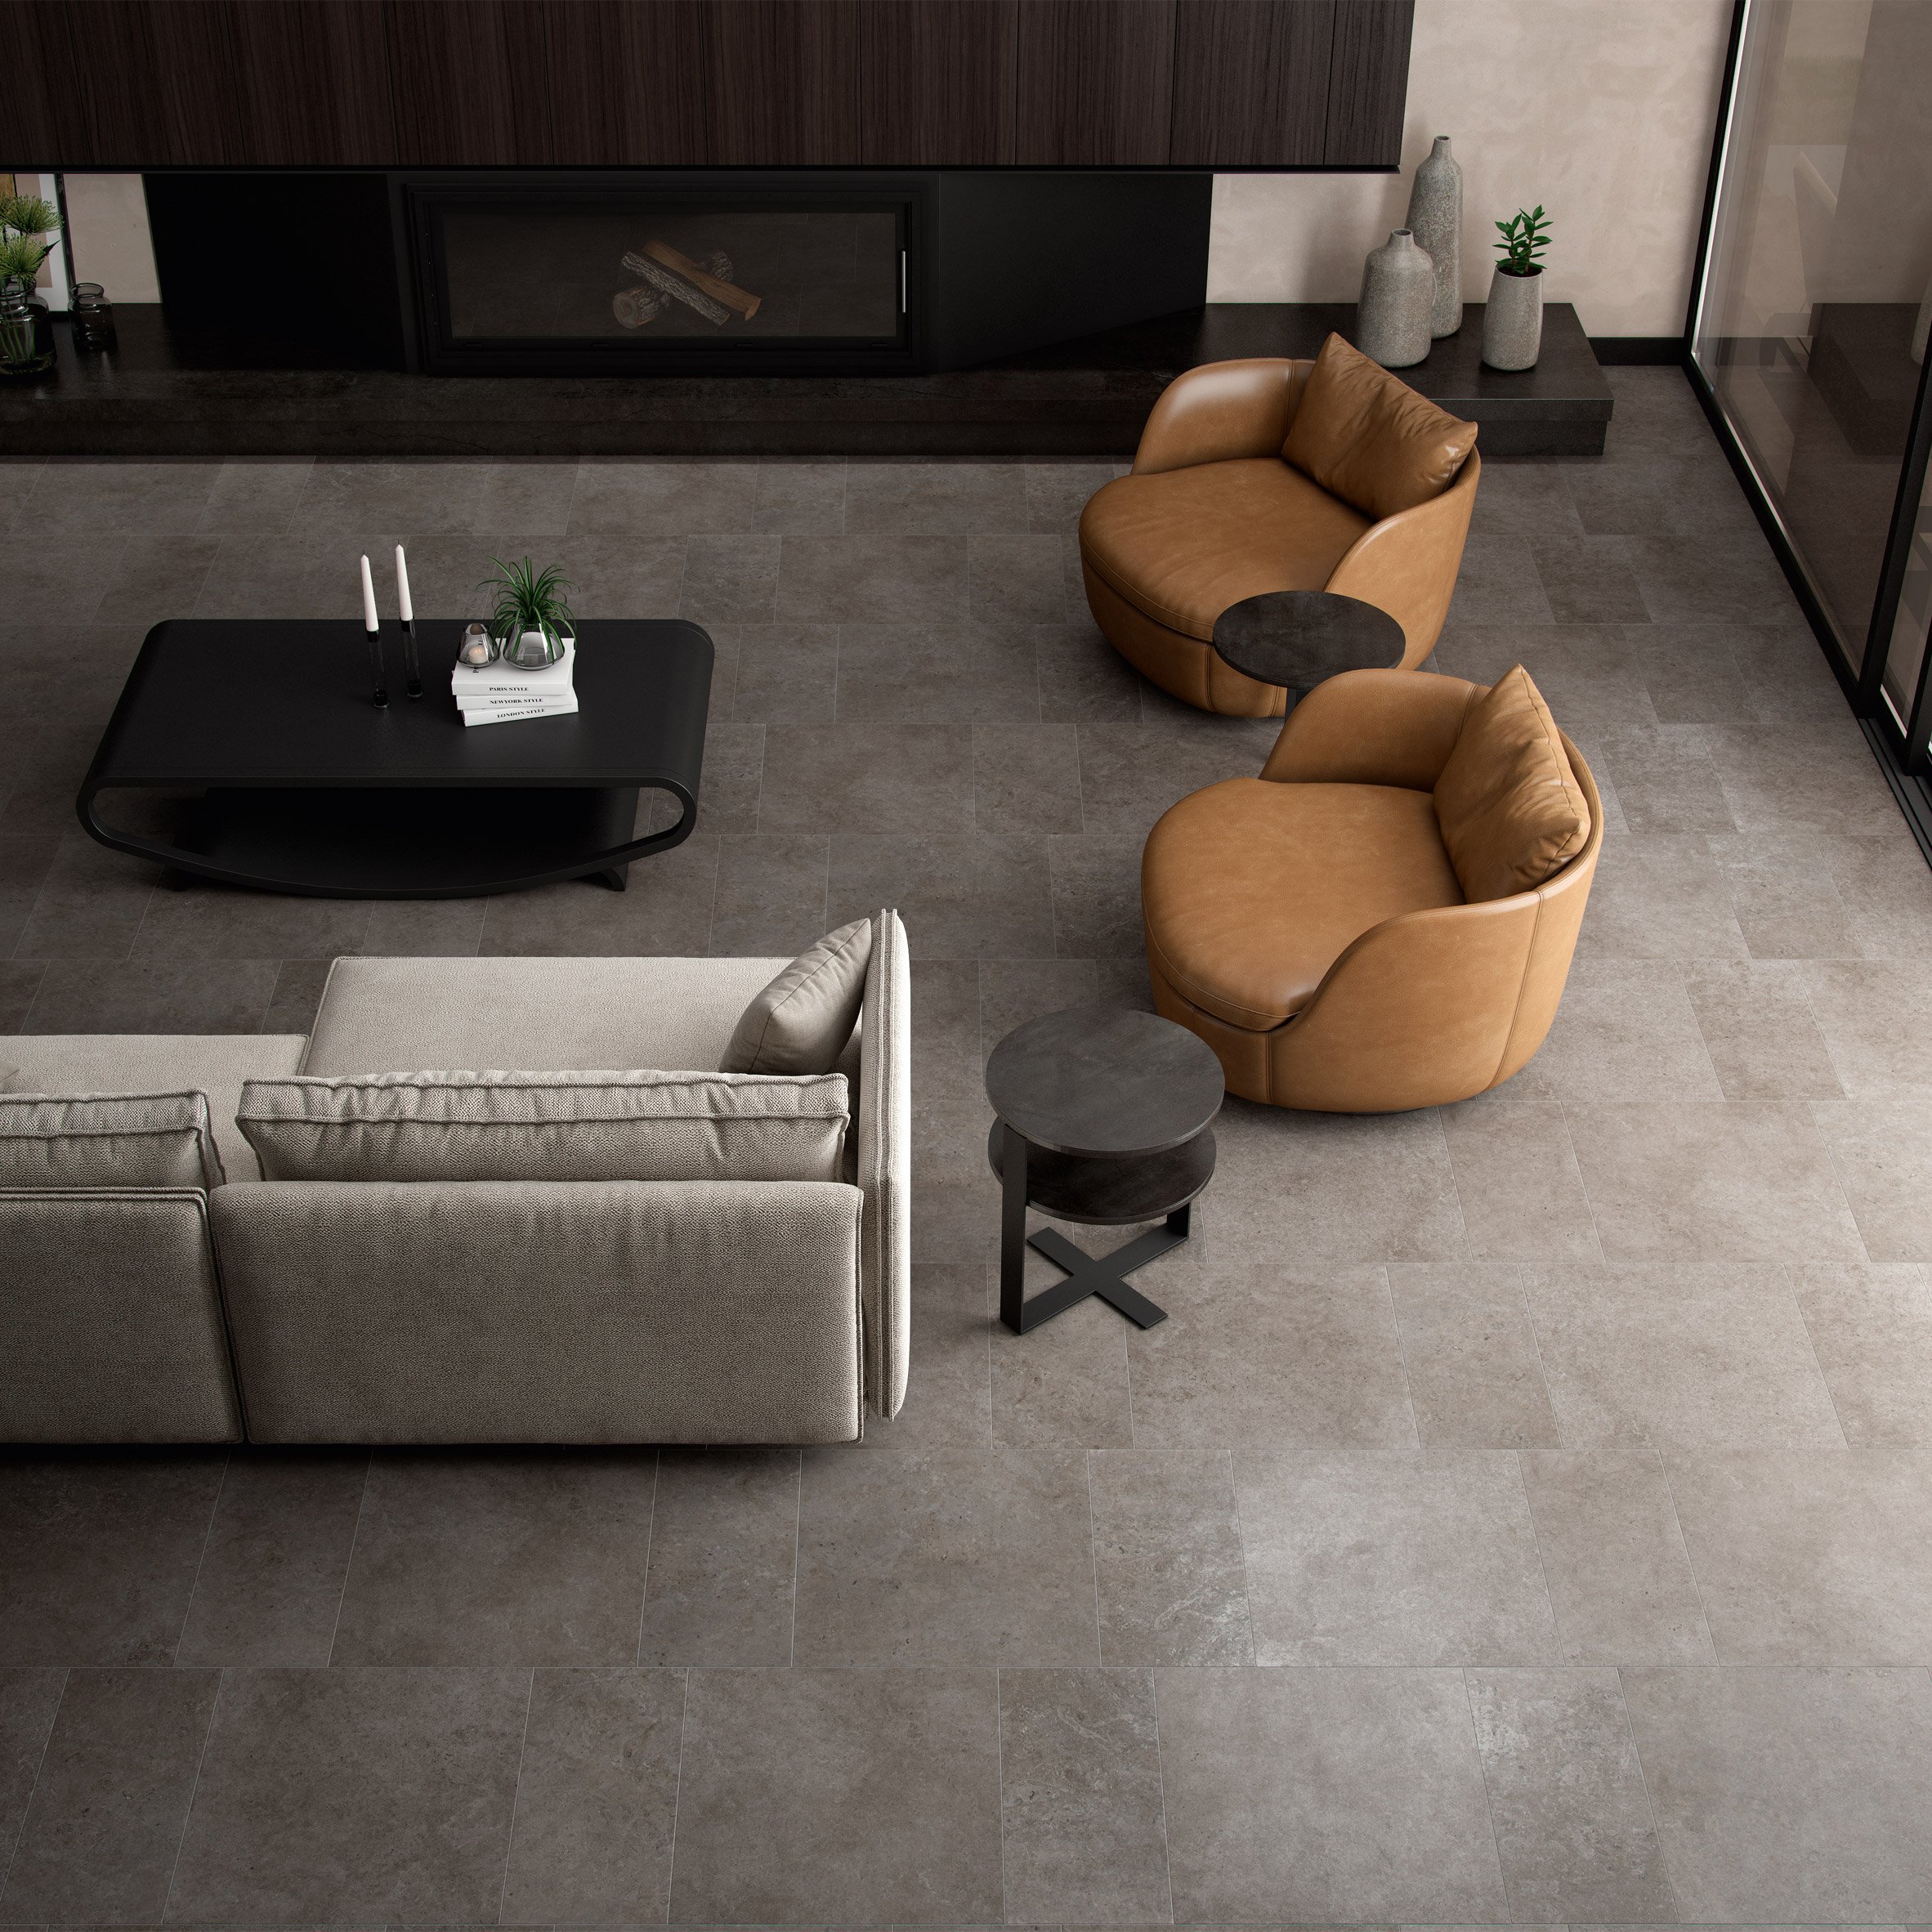 A photograph of Limestone tiles used for flooring in a living room setting